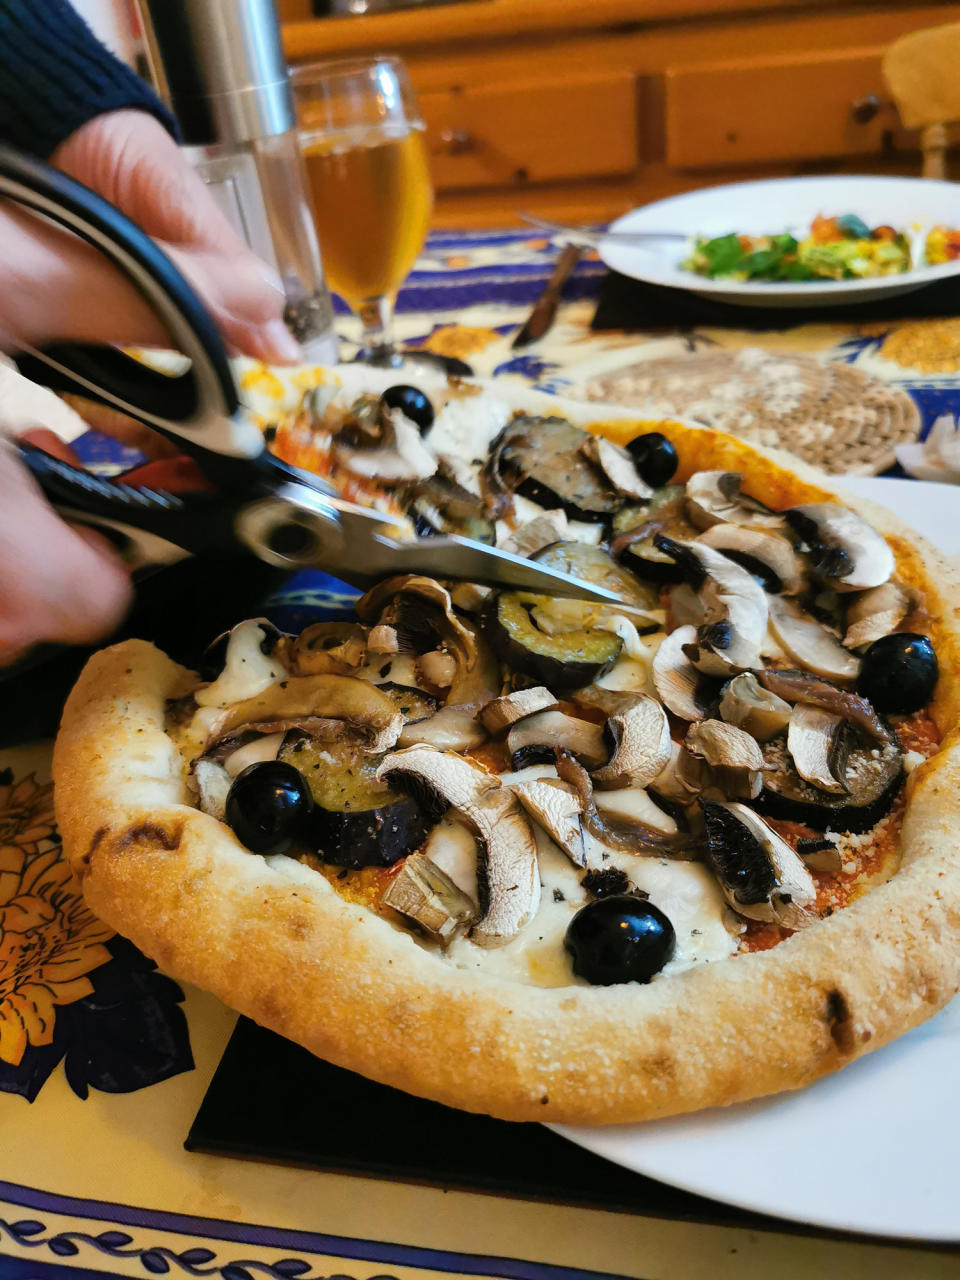 Slicing a mushroom pizza with kitchen shears.